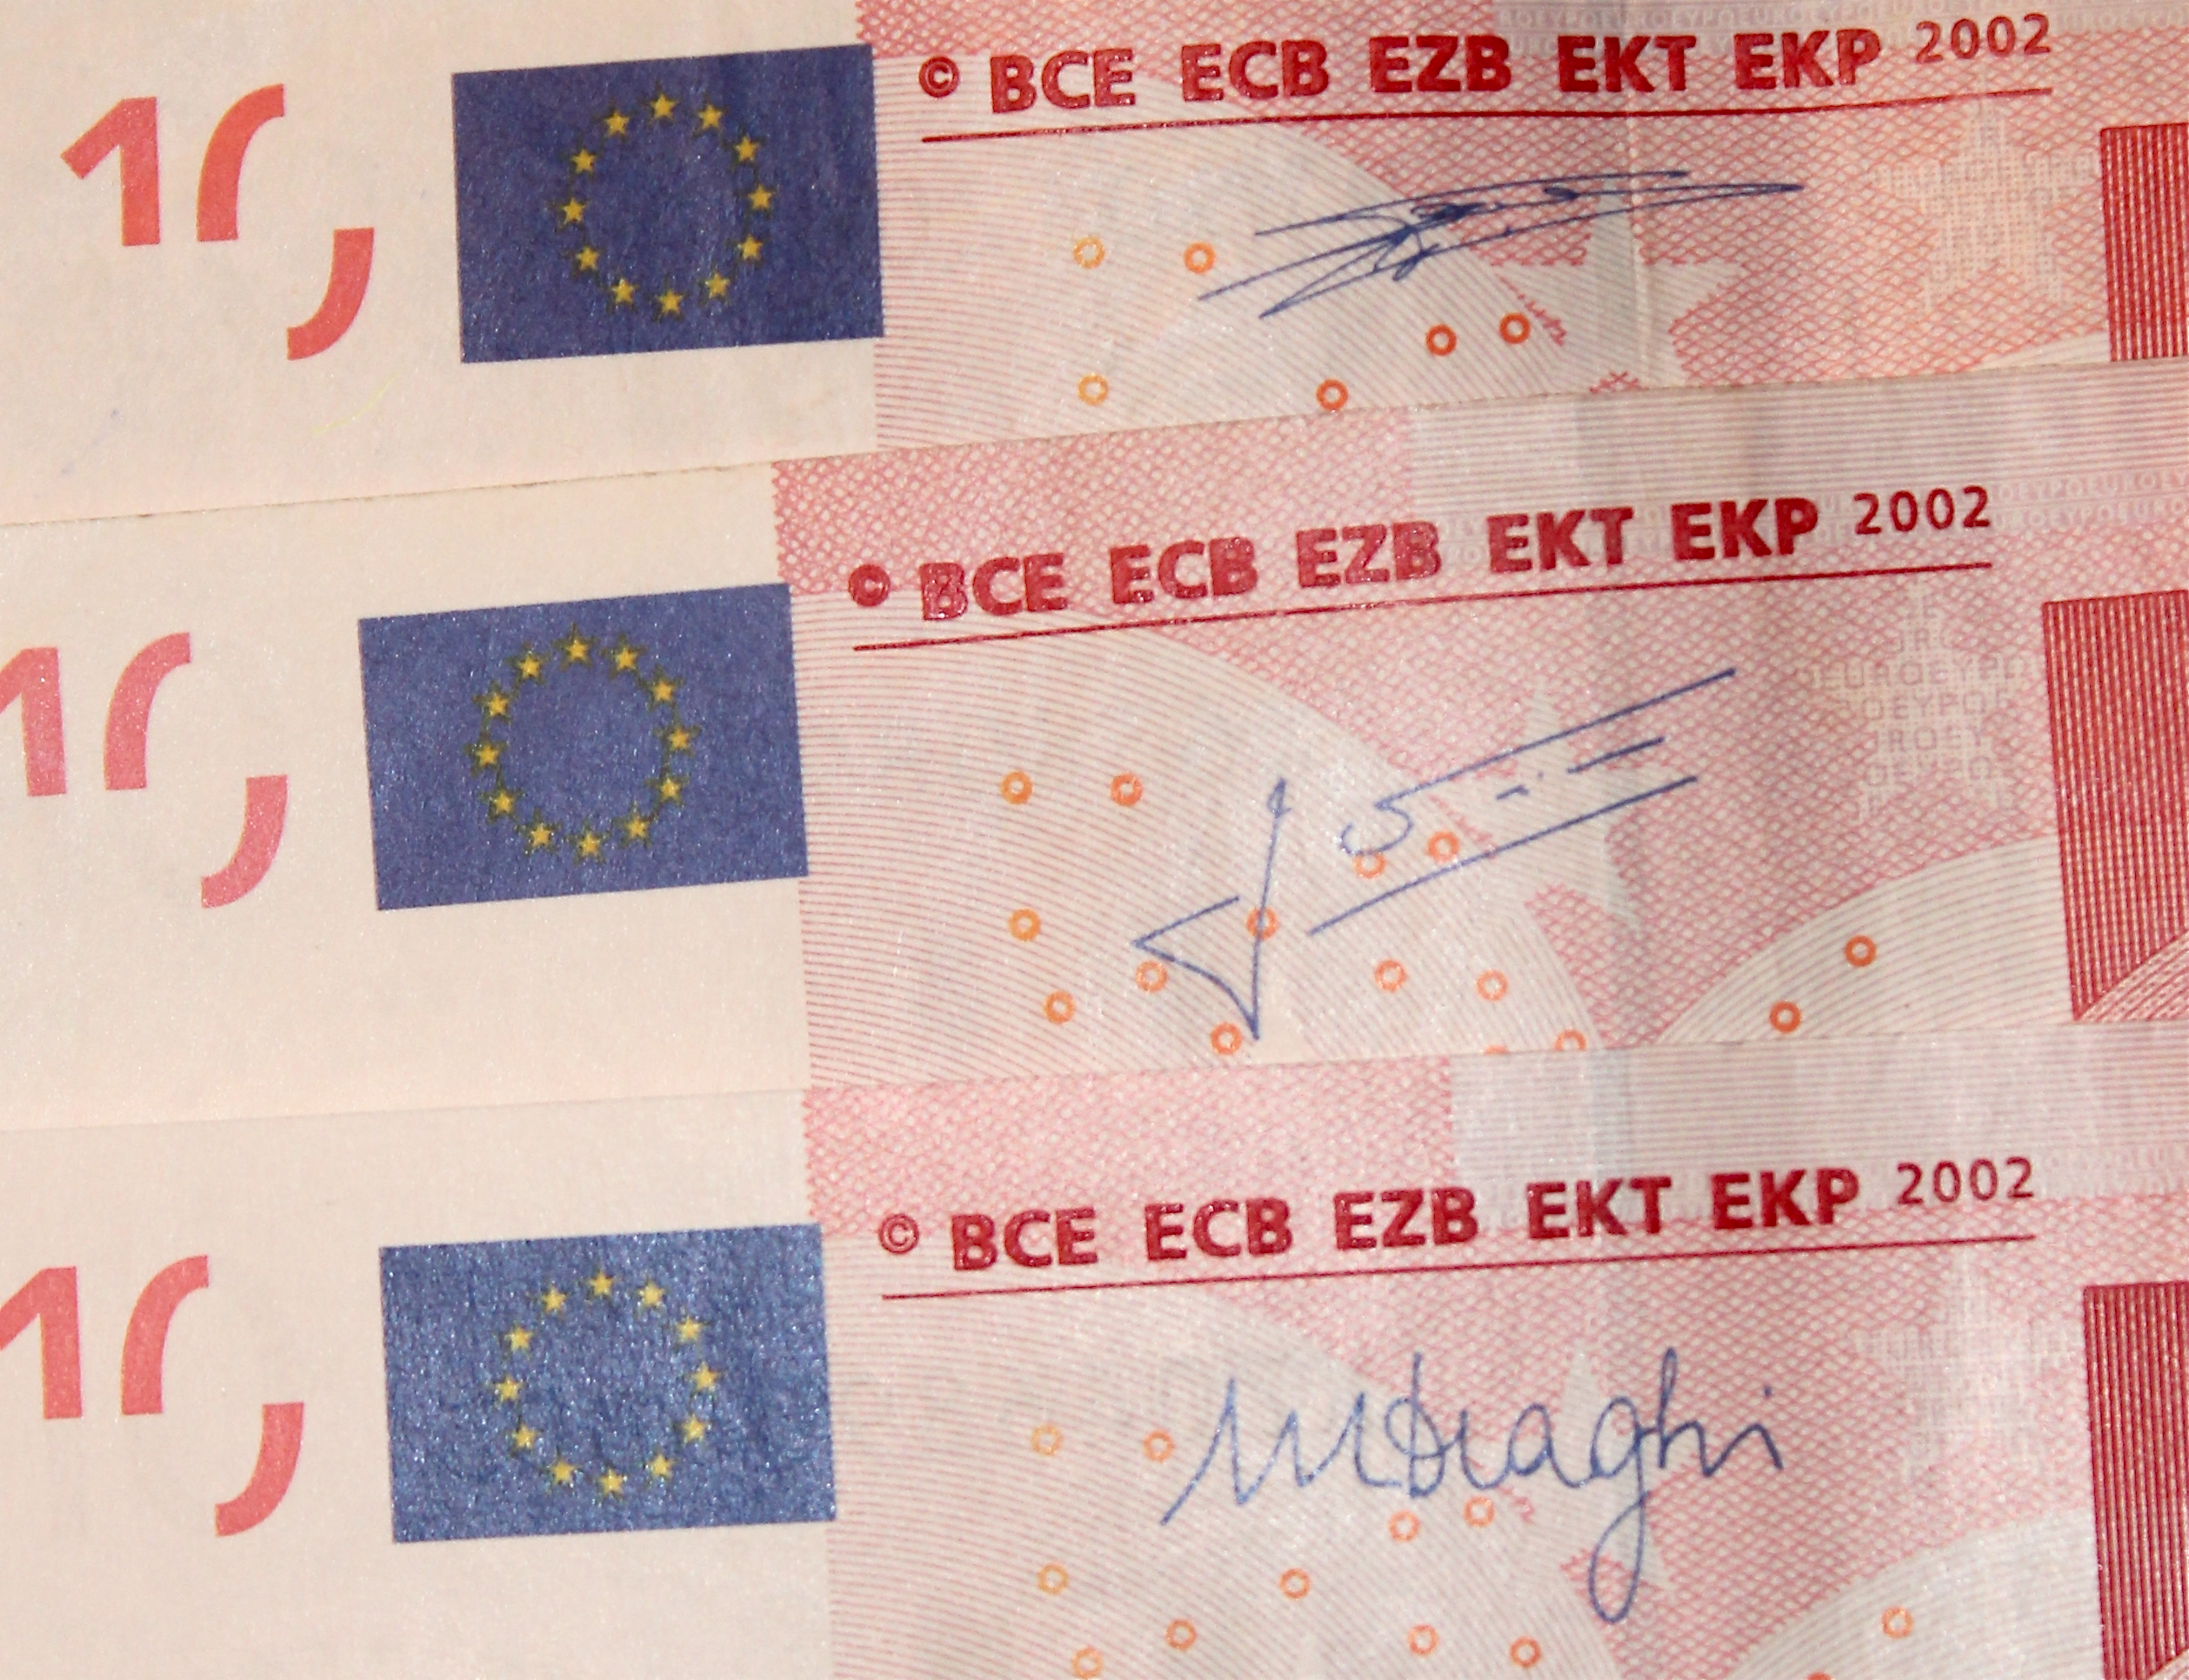 Signatures of the presidents of the European Central Bank (from top to bottom) Wim Duisenberg, Jean-Claude Trichet and Mario Draghi on the 2002 edition of 10 euro banknotes. Source: ECB